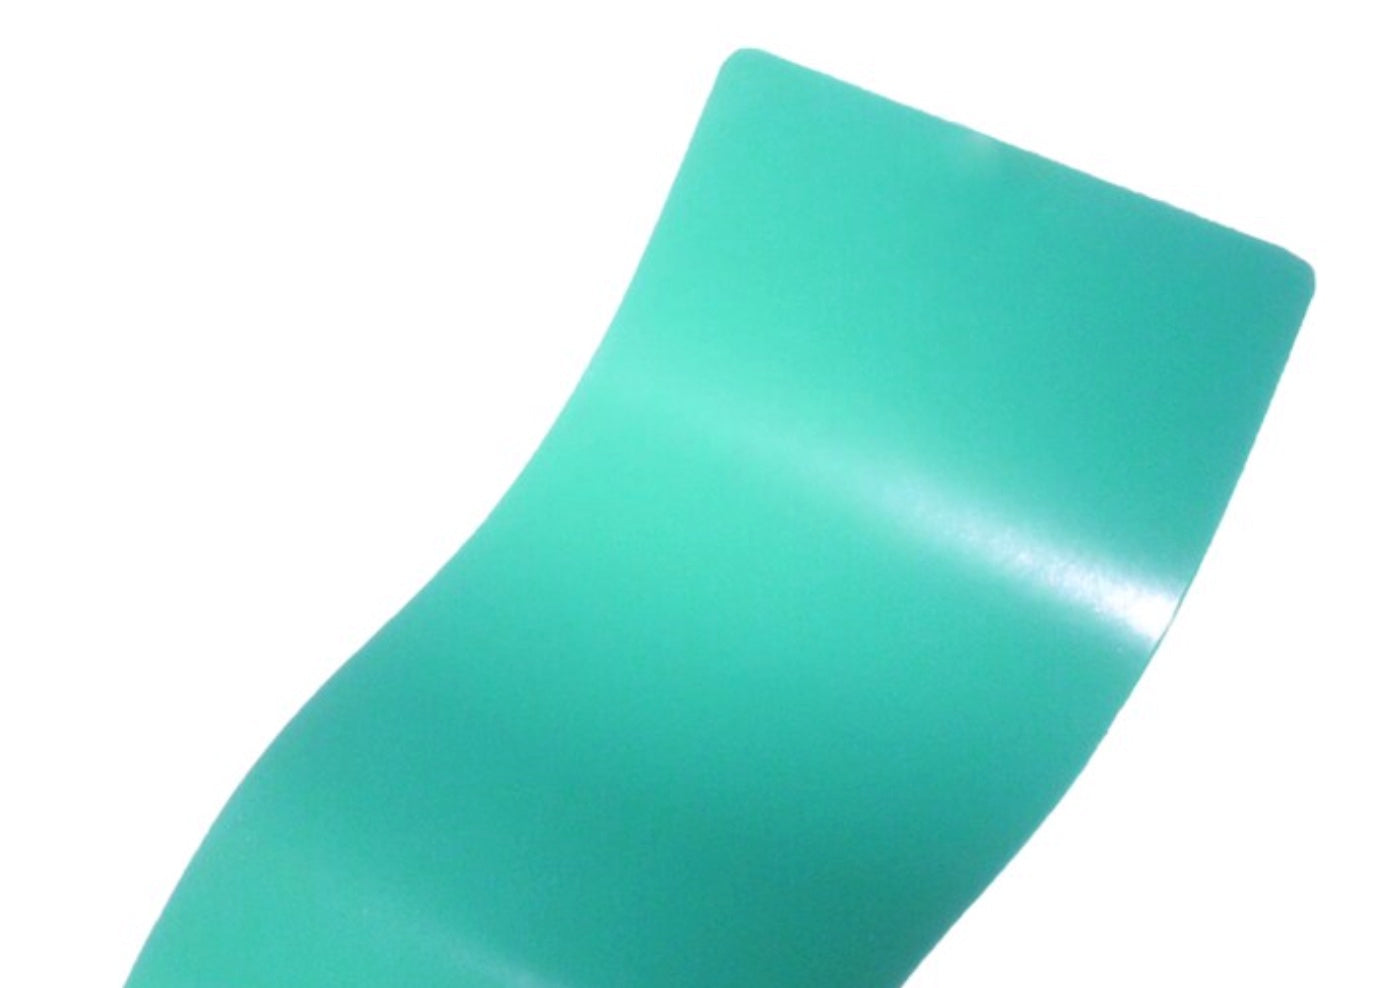 Powder Coating - Venice Teal, 2oz container, Gloss